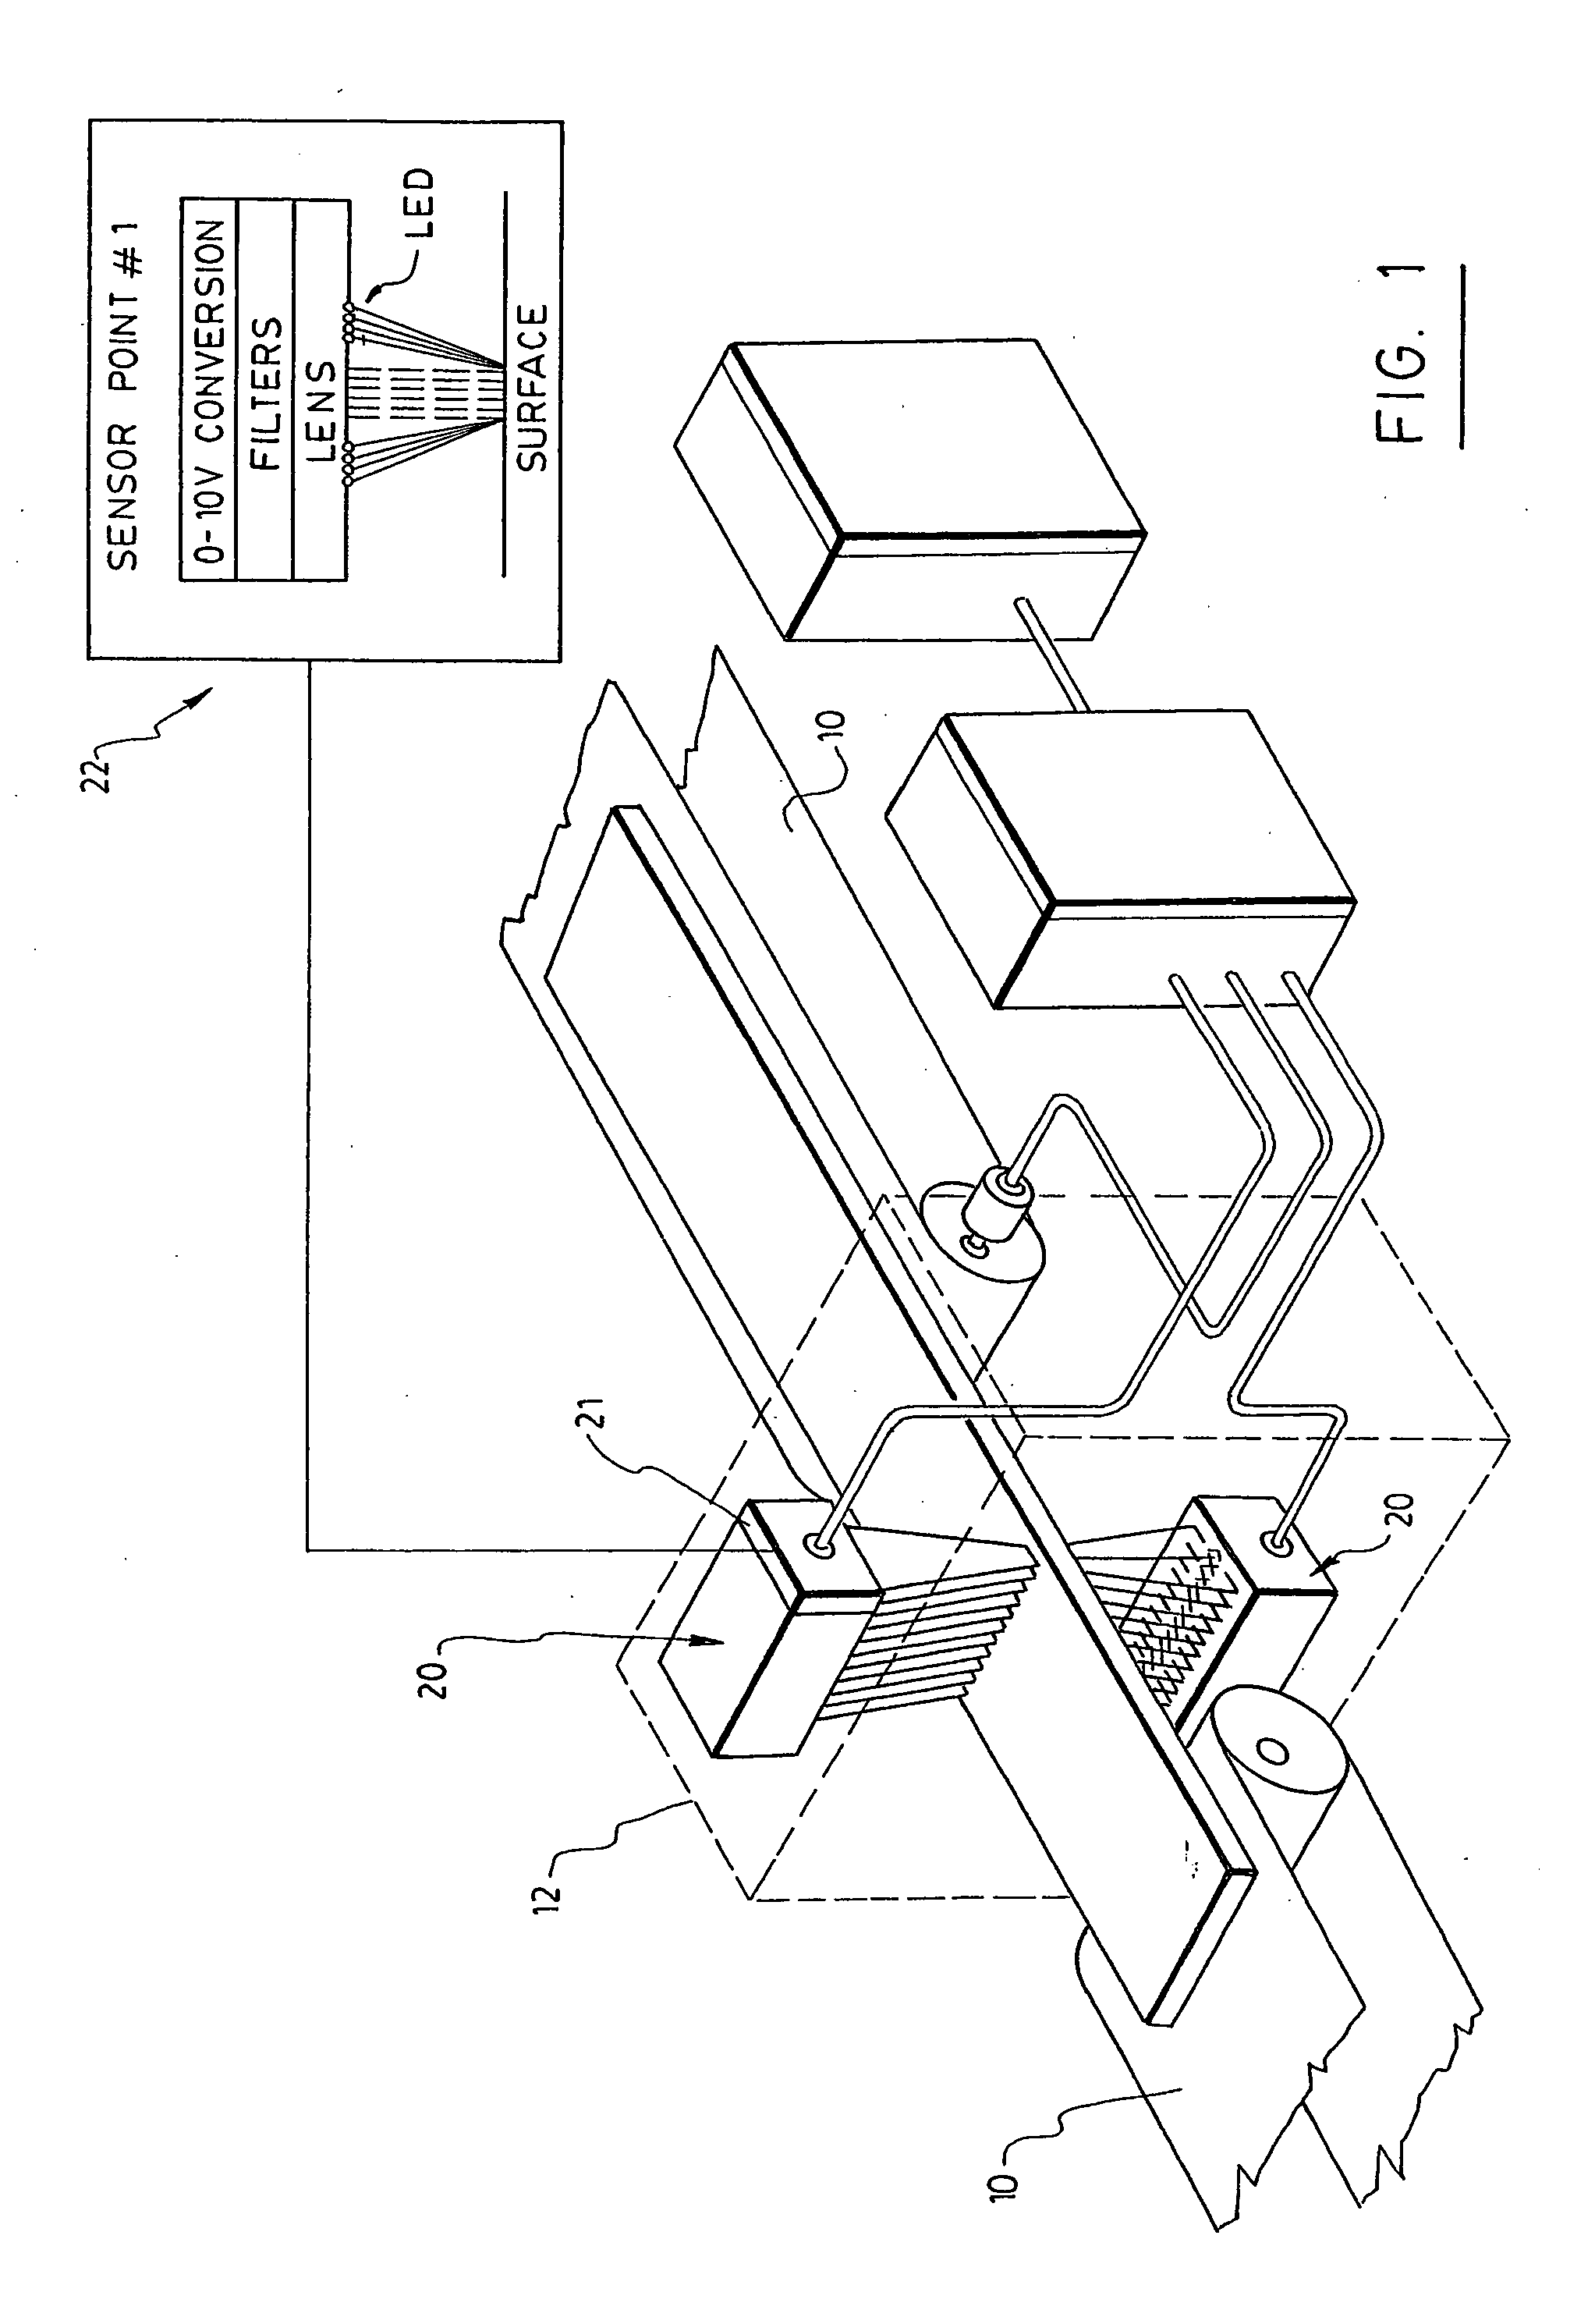 System and method for the detection of bluestain and rot on wood